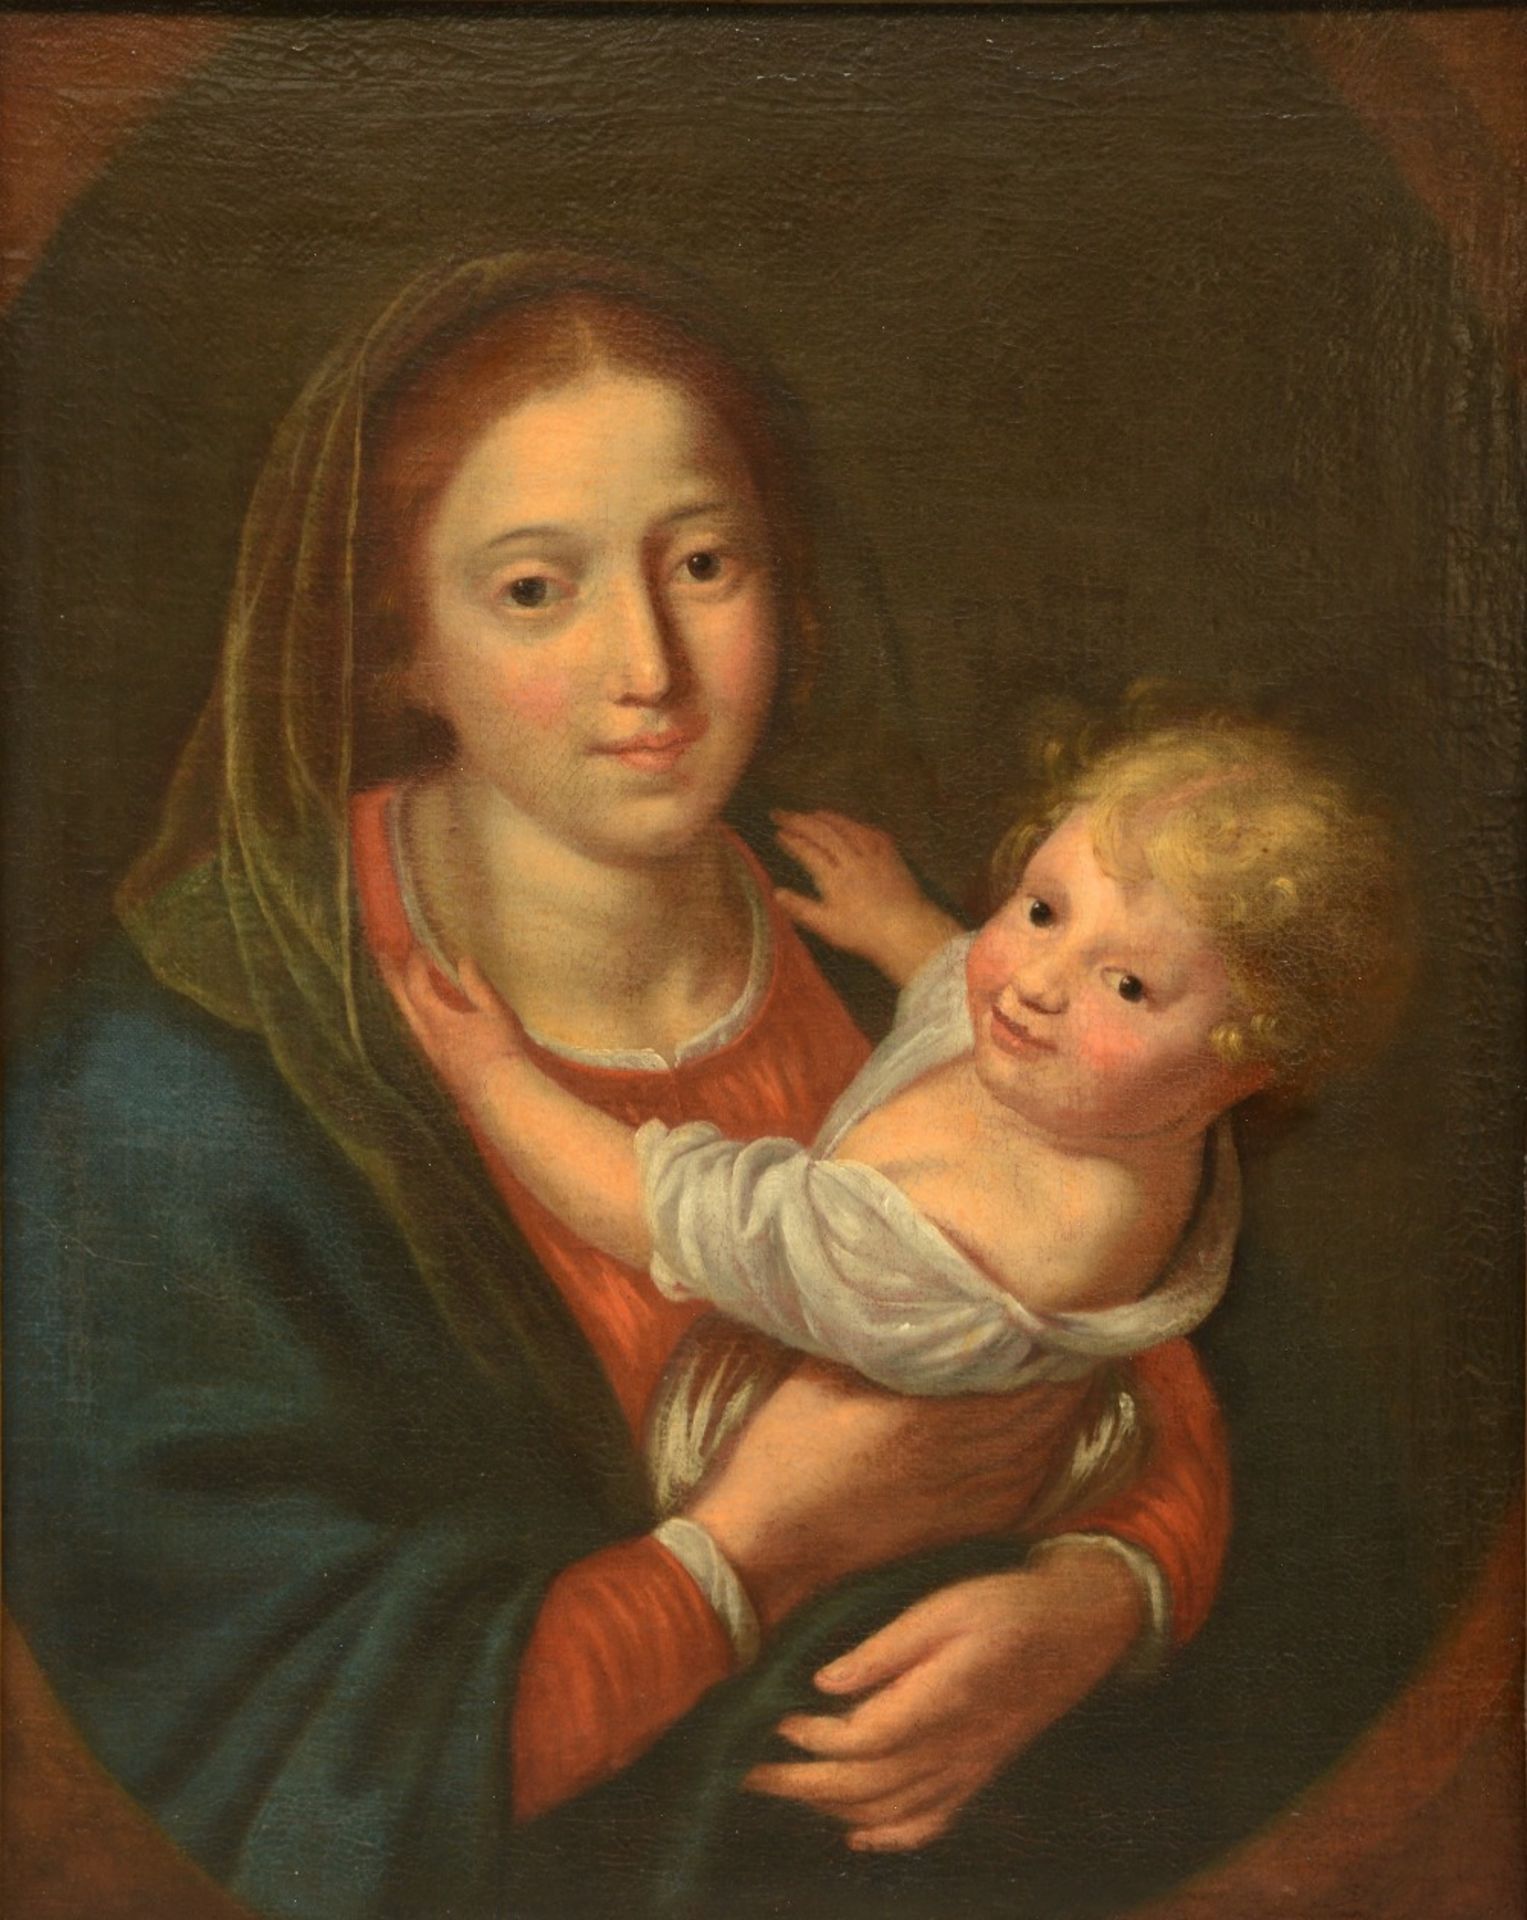 Unsigned (attr. to Cornelis Schut), mother and child, oil on canvas, late 17thC, 52 x 63,5 cm